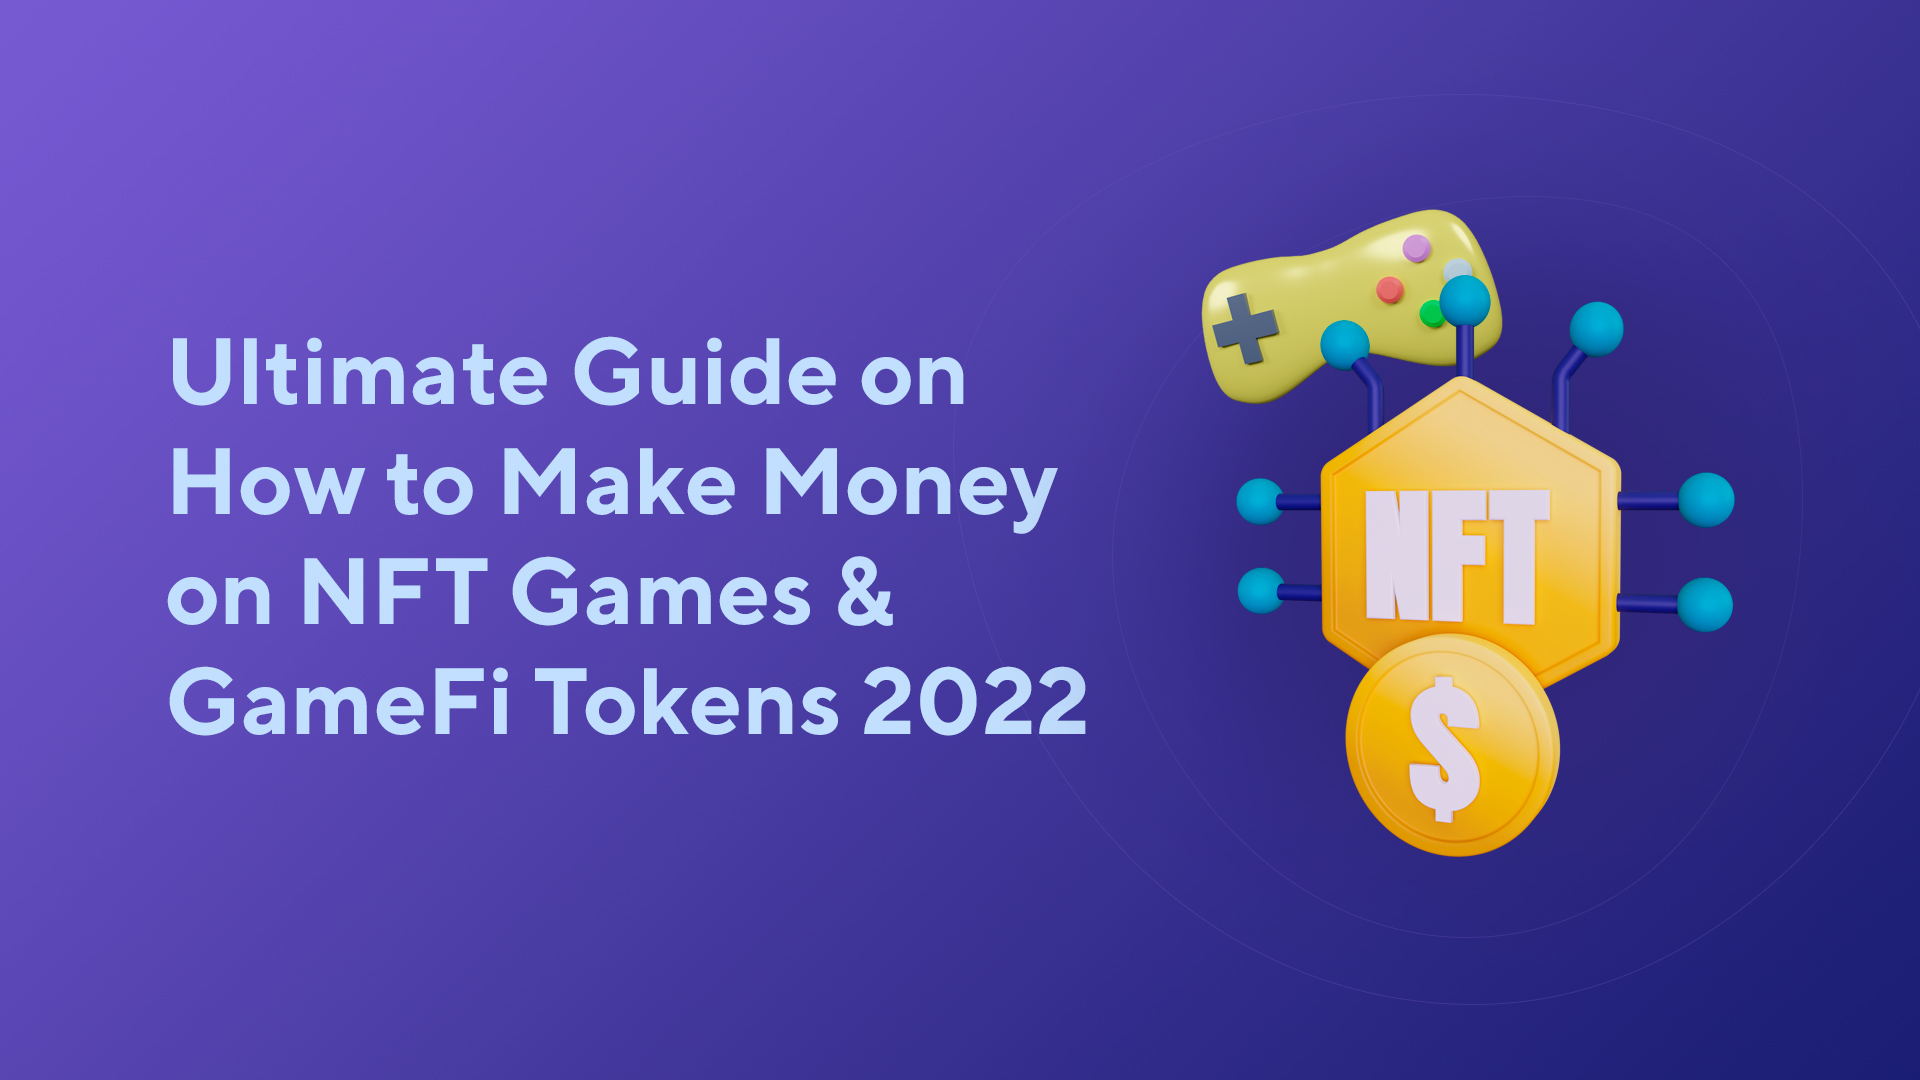 Ultimate Guide on How to Make Money on NFT Games & GameFi Tokens 2022